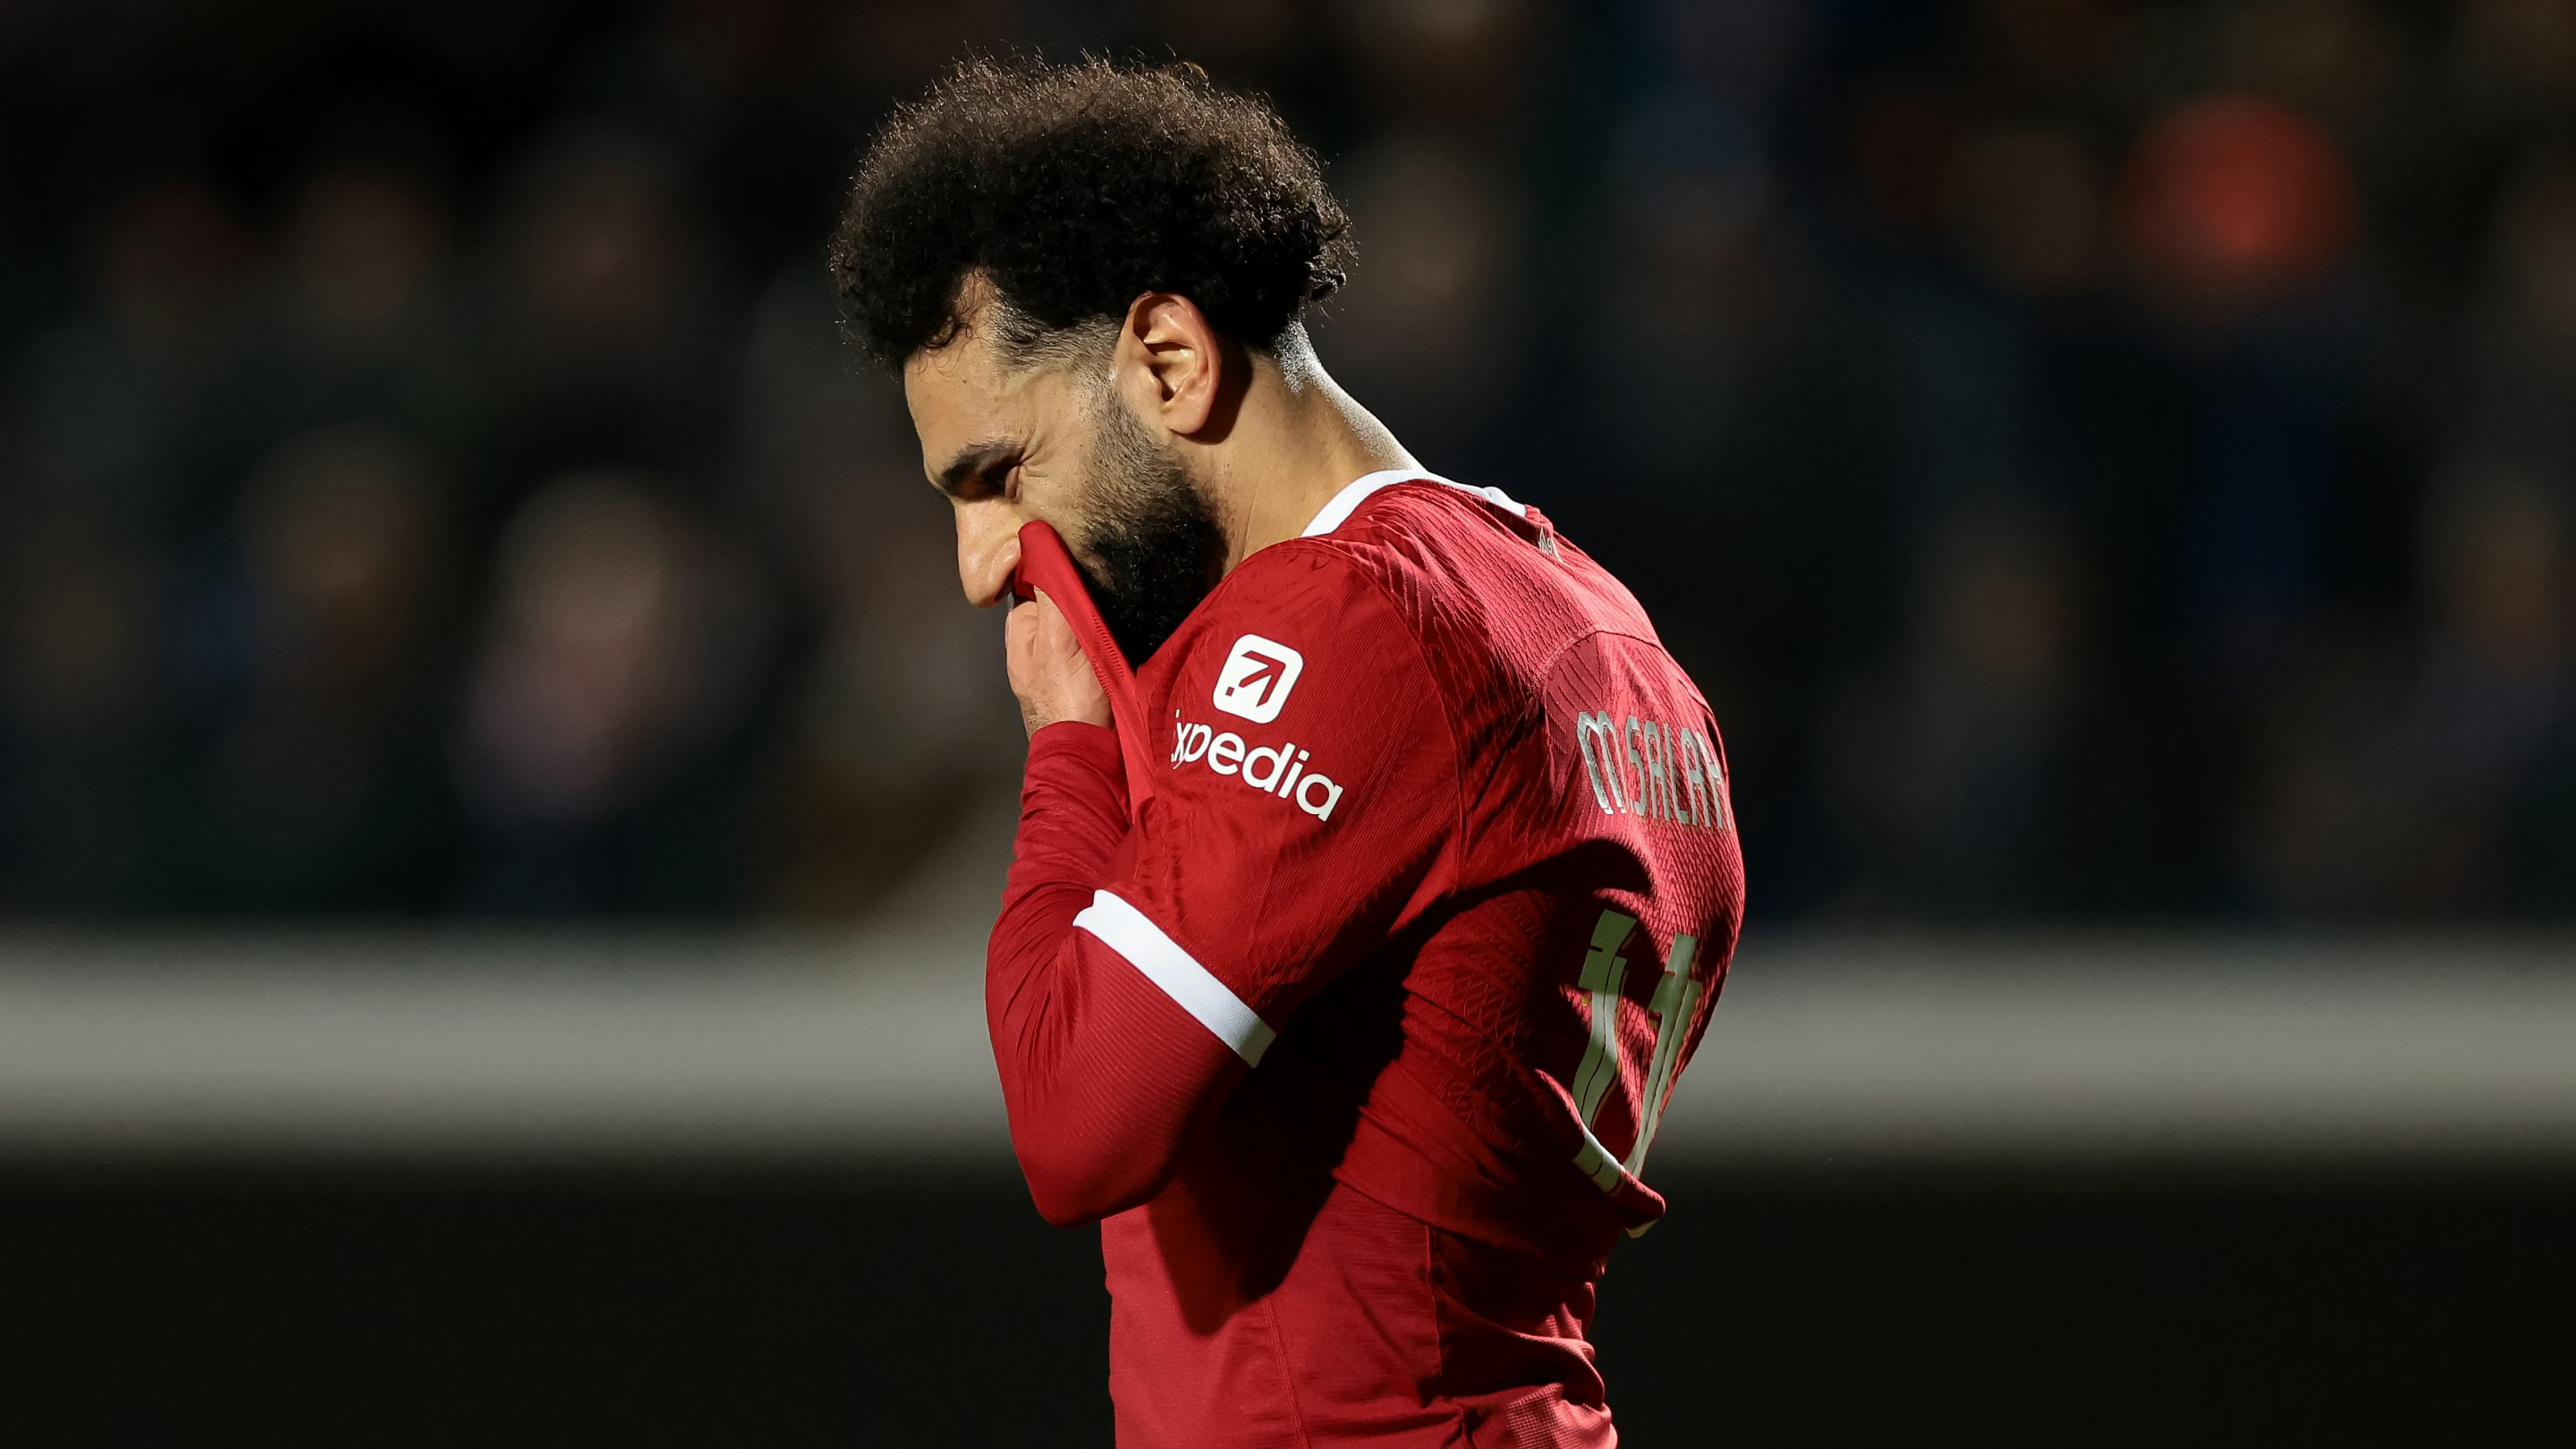 X reacts as 'tepid' Liverpool exit Europa League with a whimper